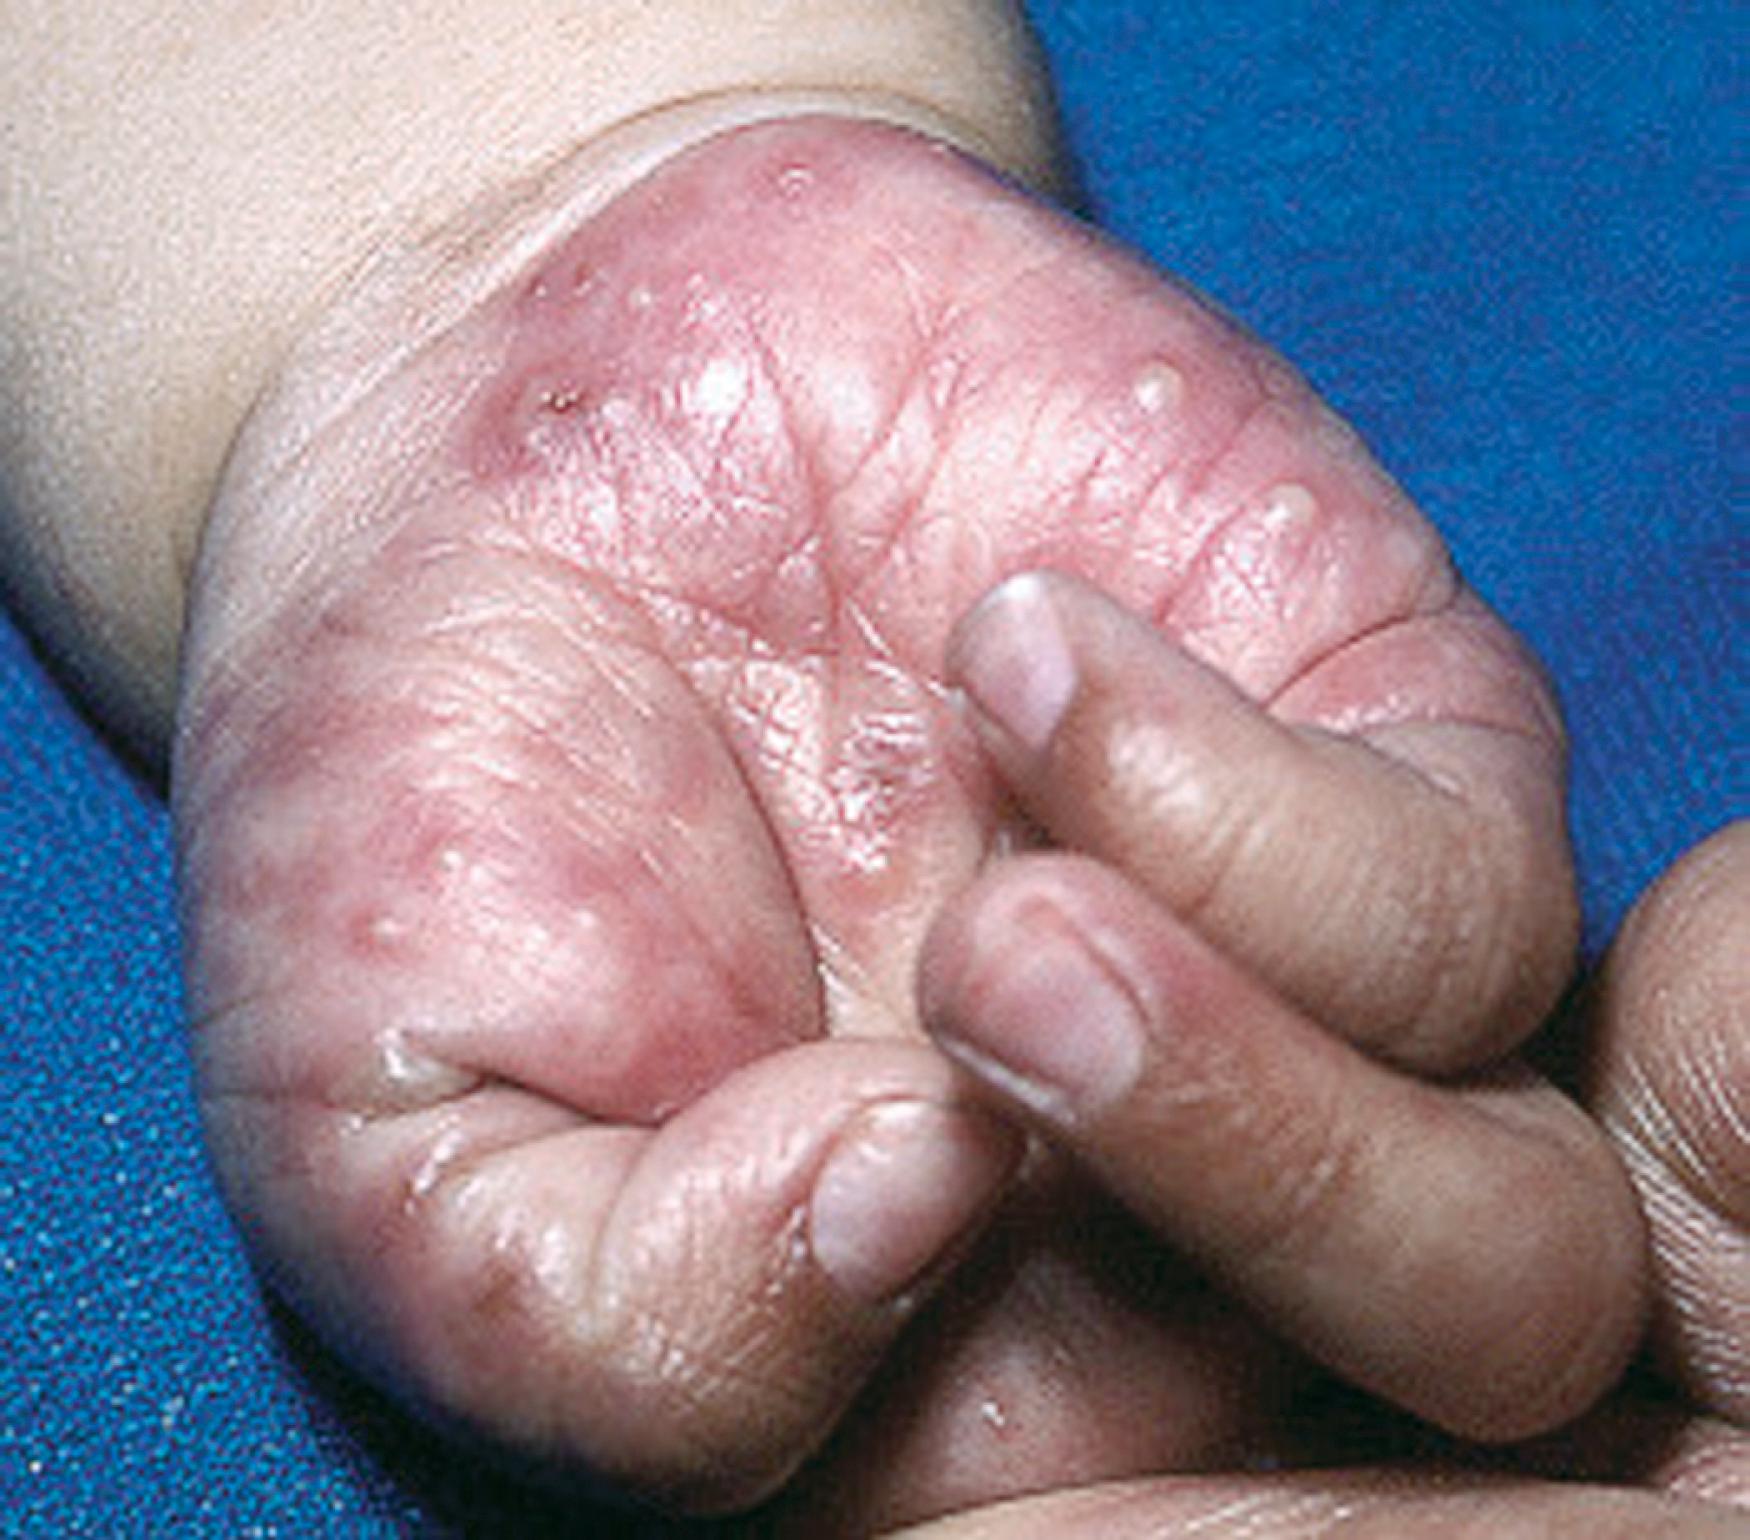 Fig. 60.3, Acropustulosis of infancy. Multiple tense erythematous papules and pustules on the palm of this 4-month-old girl.